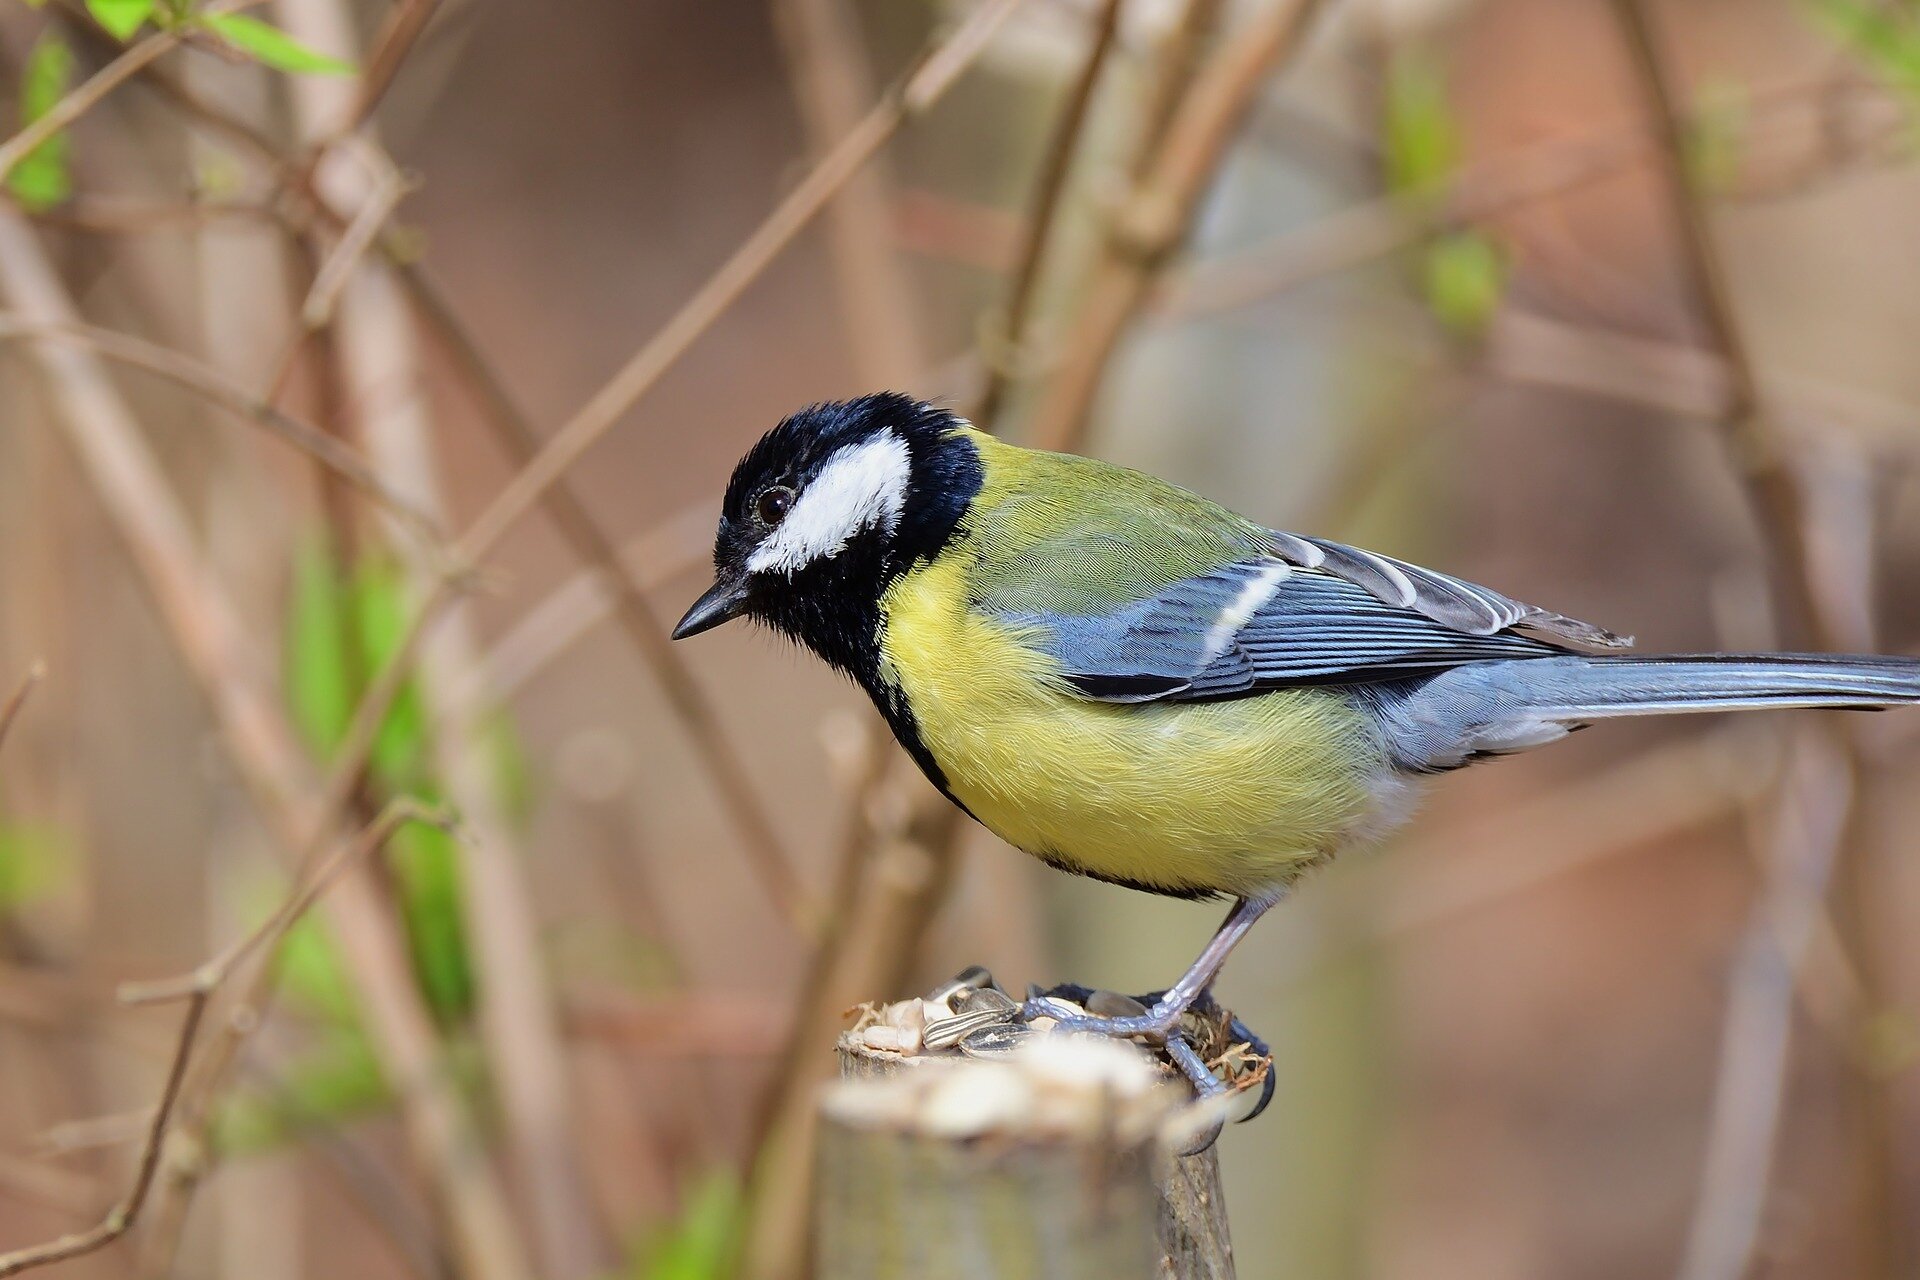 Urban Great Tits Have Paler Plumage Than Their Forest Living Relatives